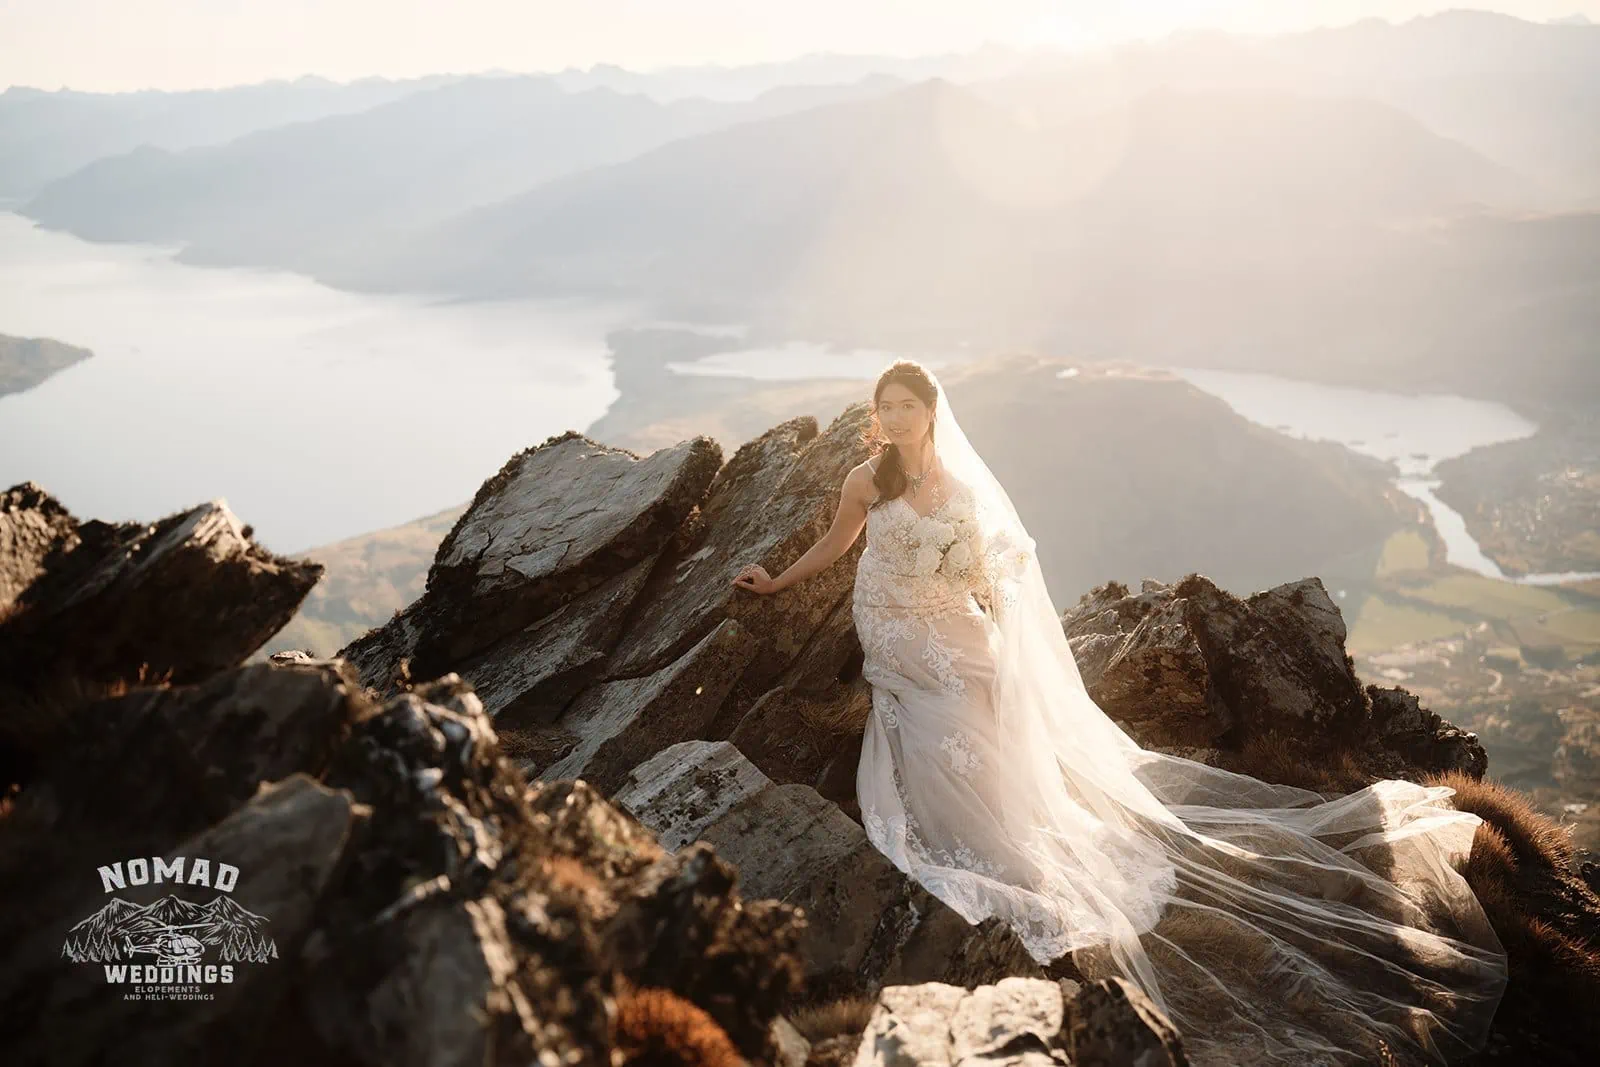 Connie and Andrew, a bride and groom, having their pre-wedding shoot on top of The Remarkables mountain overlooking Lake Wanaka.